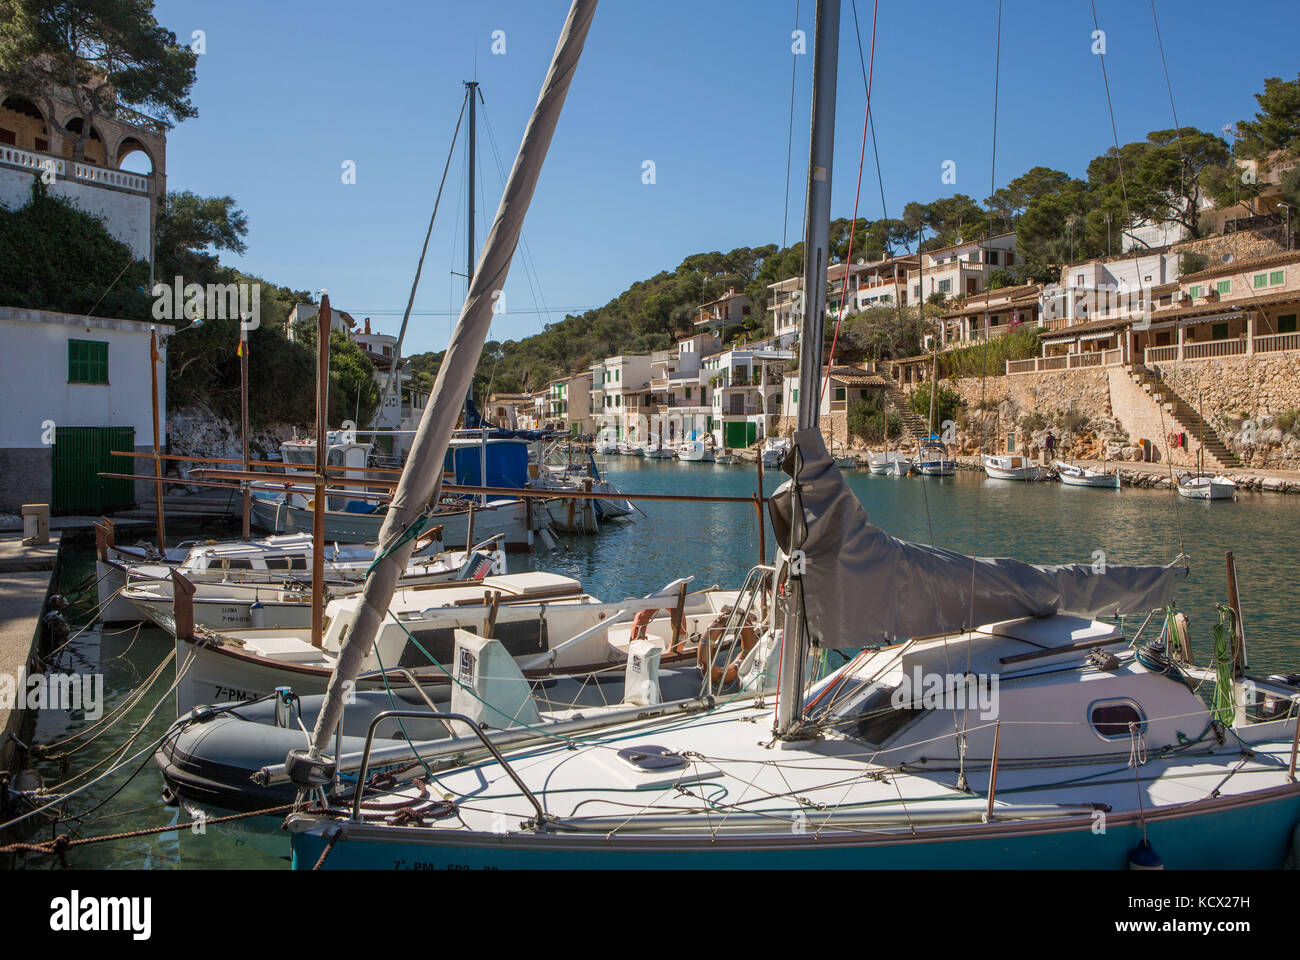 Boats moored in harbour, Cala Figuera, Majorca, Balearic Islands, Spain. Stock Photo